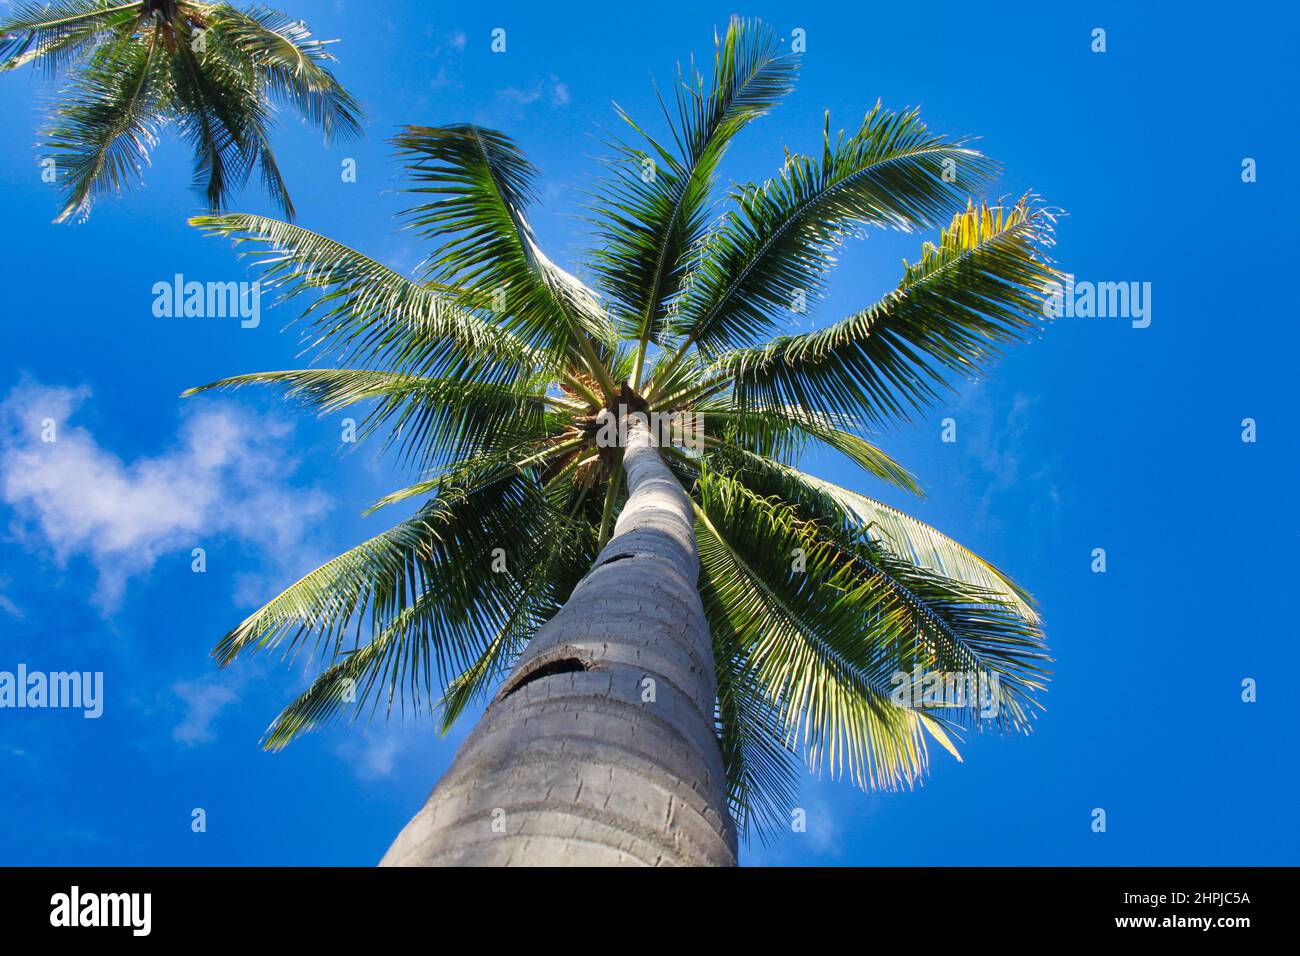 A low-angle shot of a tall palm tree with a stunning blue background of the clear blue sky on Gumasa Beach, Mindanao, Philippines. Stock Photo